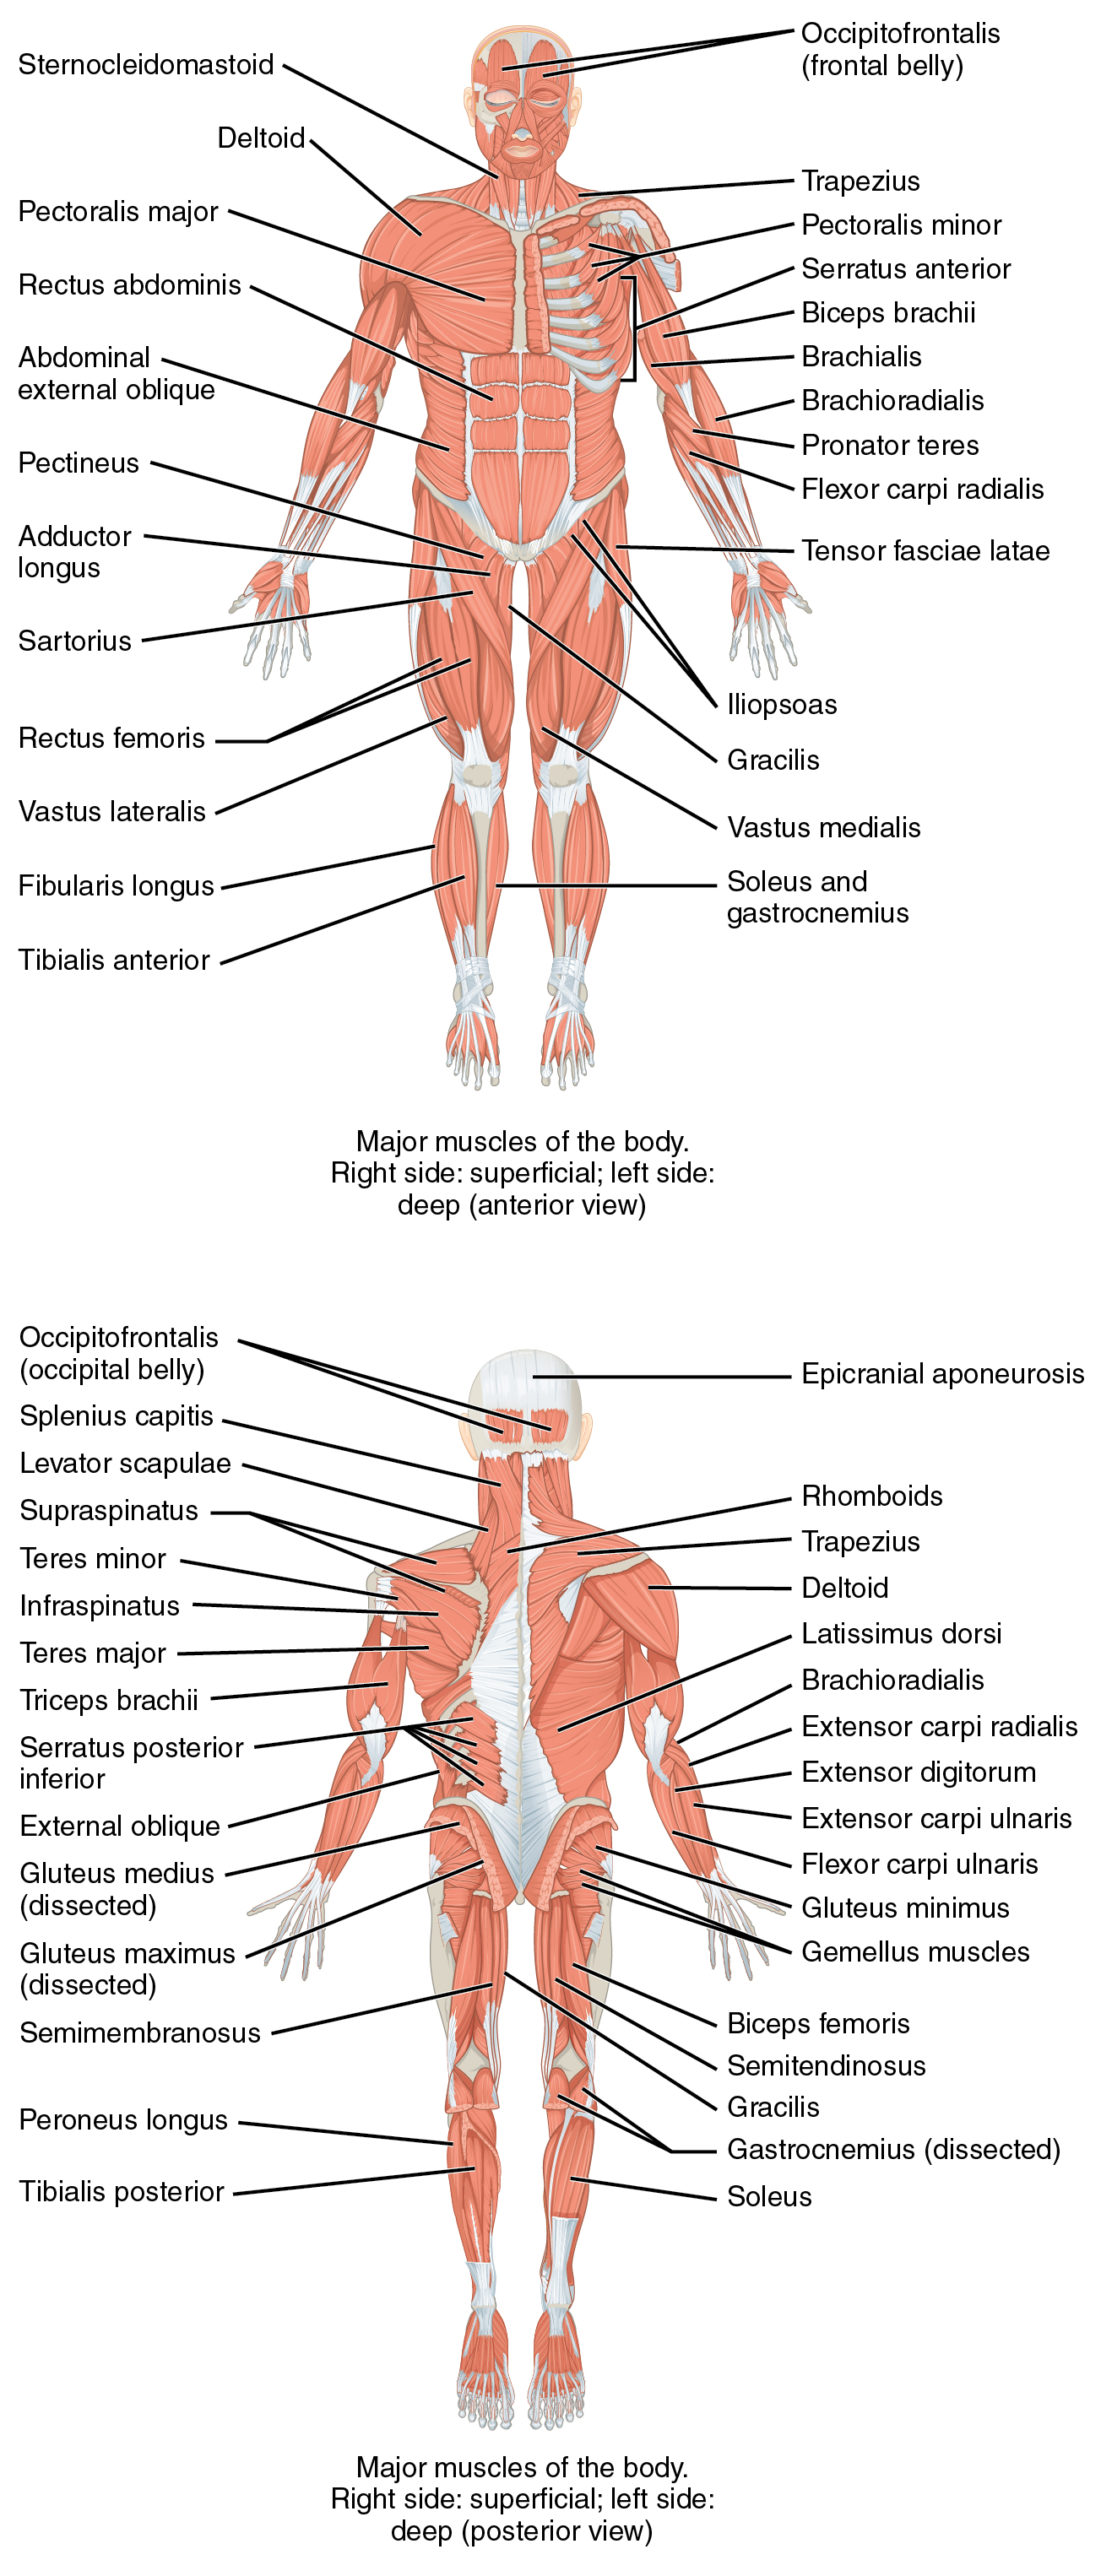 The top panel shows the anterior view of the human body with the major muscles labeled. The bottom panel shows the posterior view of the human body with the major muscles labeled.